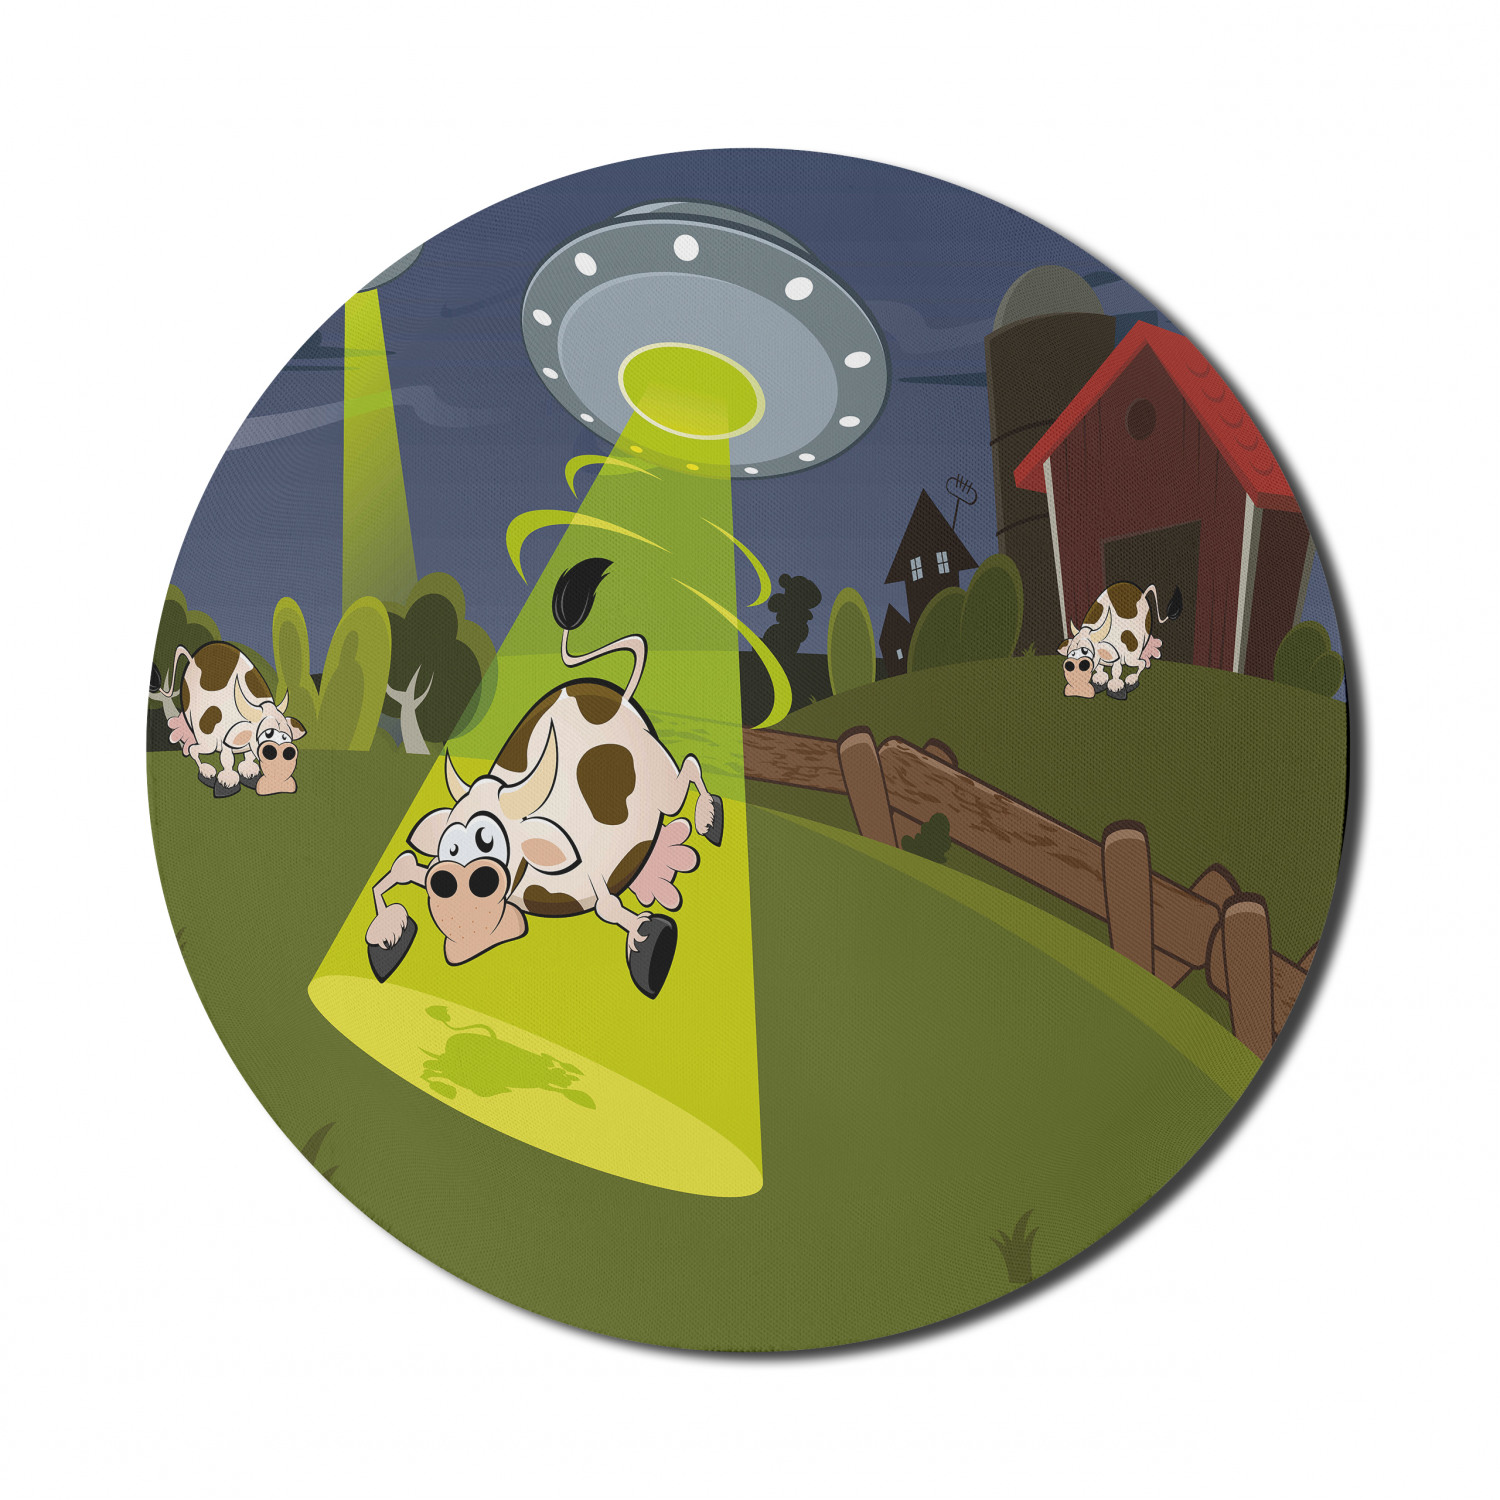 Cartoon Mouse Pad for Computers, Farm Warehouse Grass Fences Cow Alien Abduction Funny Comics Image Artwork Print, Round Non-Slip Thick Rubber Modern Mousepad, 8" Round, Multicolor, by Ambesonne - image 1 of 2